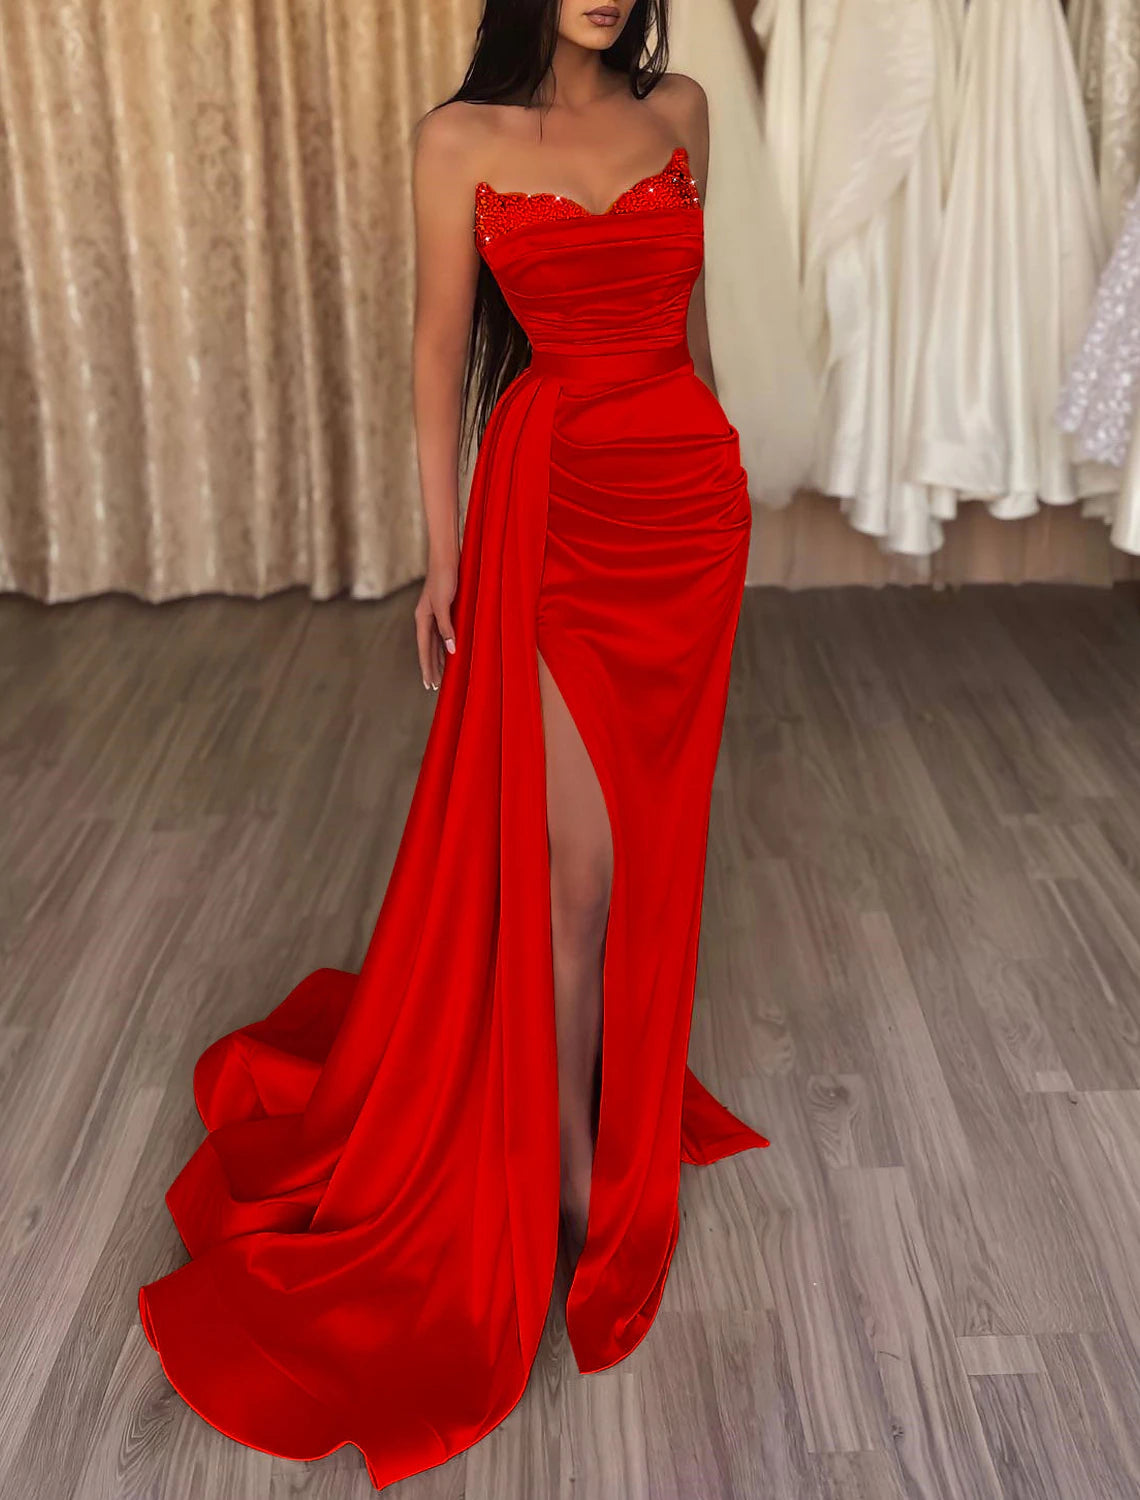 Mermaid Ruched Evening Gown Satin Dress Cocktail Party Prom Court Train Sleeveless Strapless Bridesmaid Dress with Beading Sequin